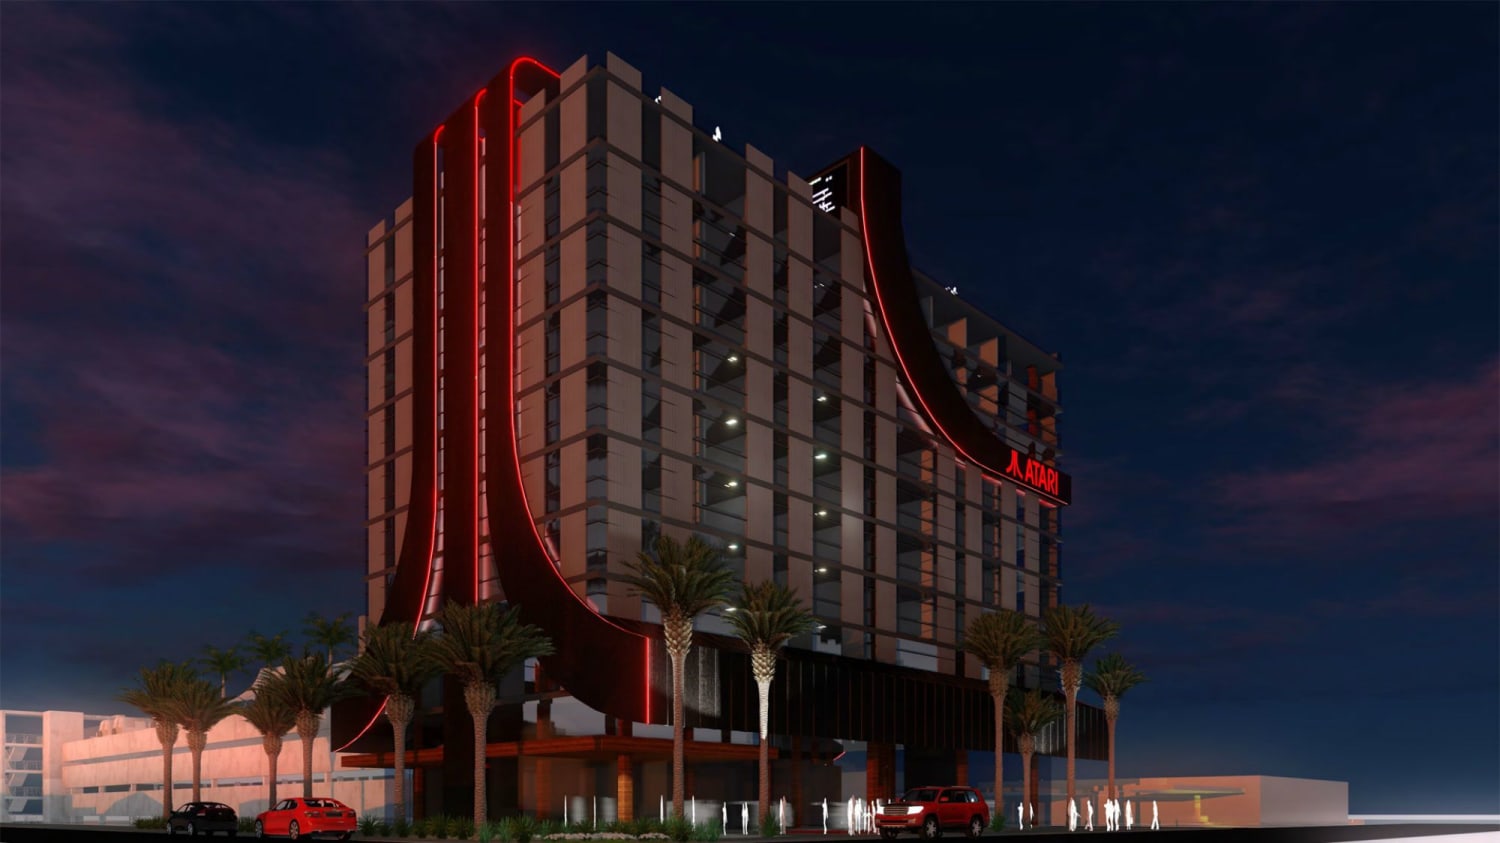 Game On: Atari Is Opening Themed Hotels in Eight U.S. Cities